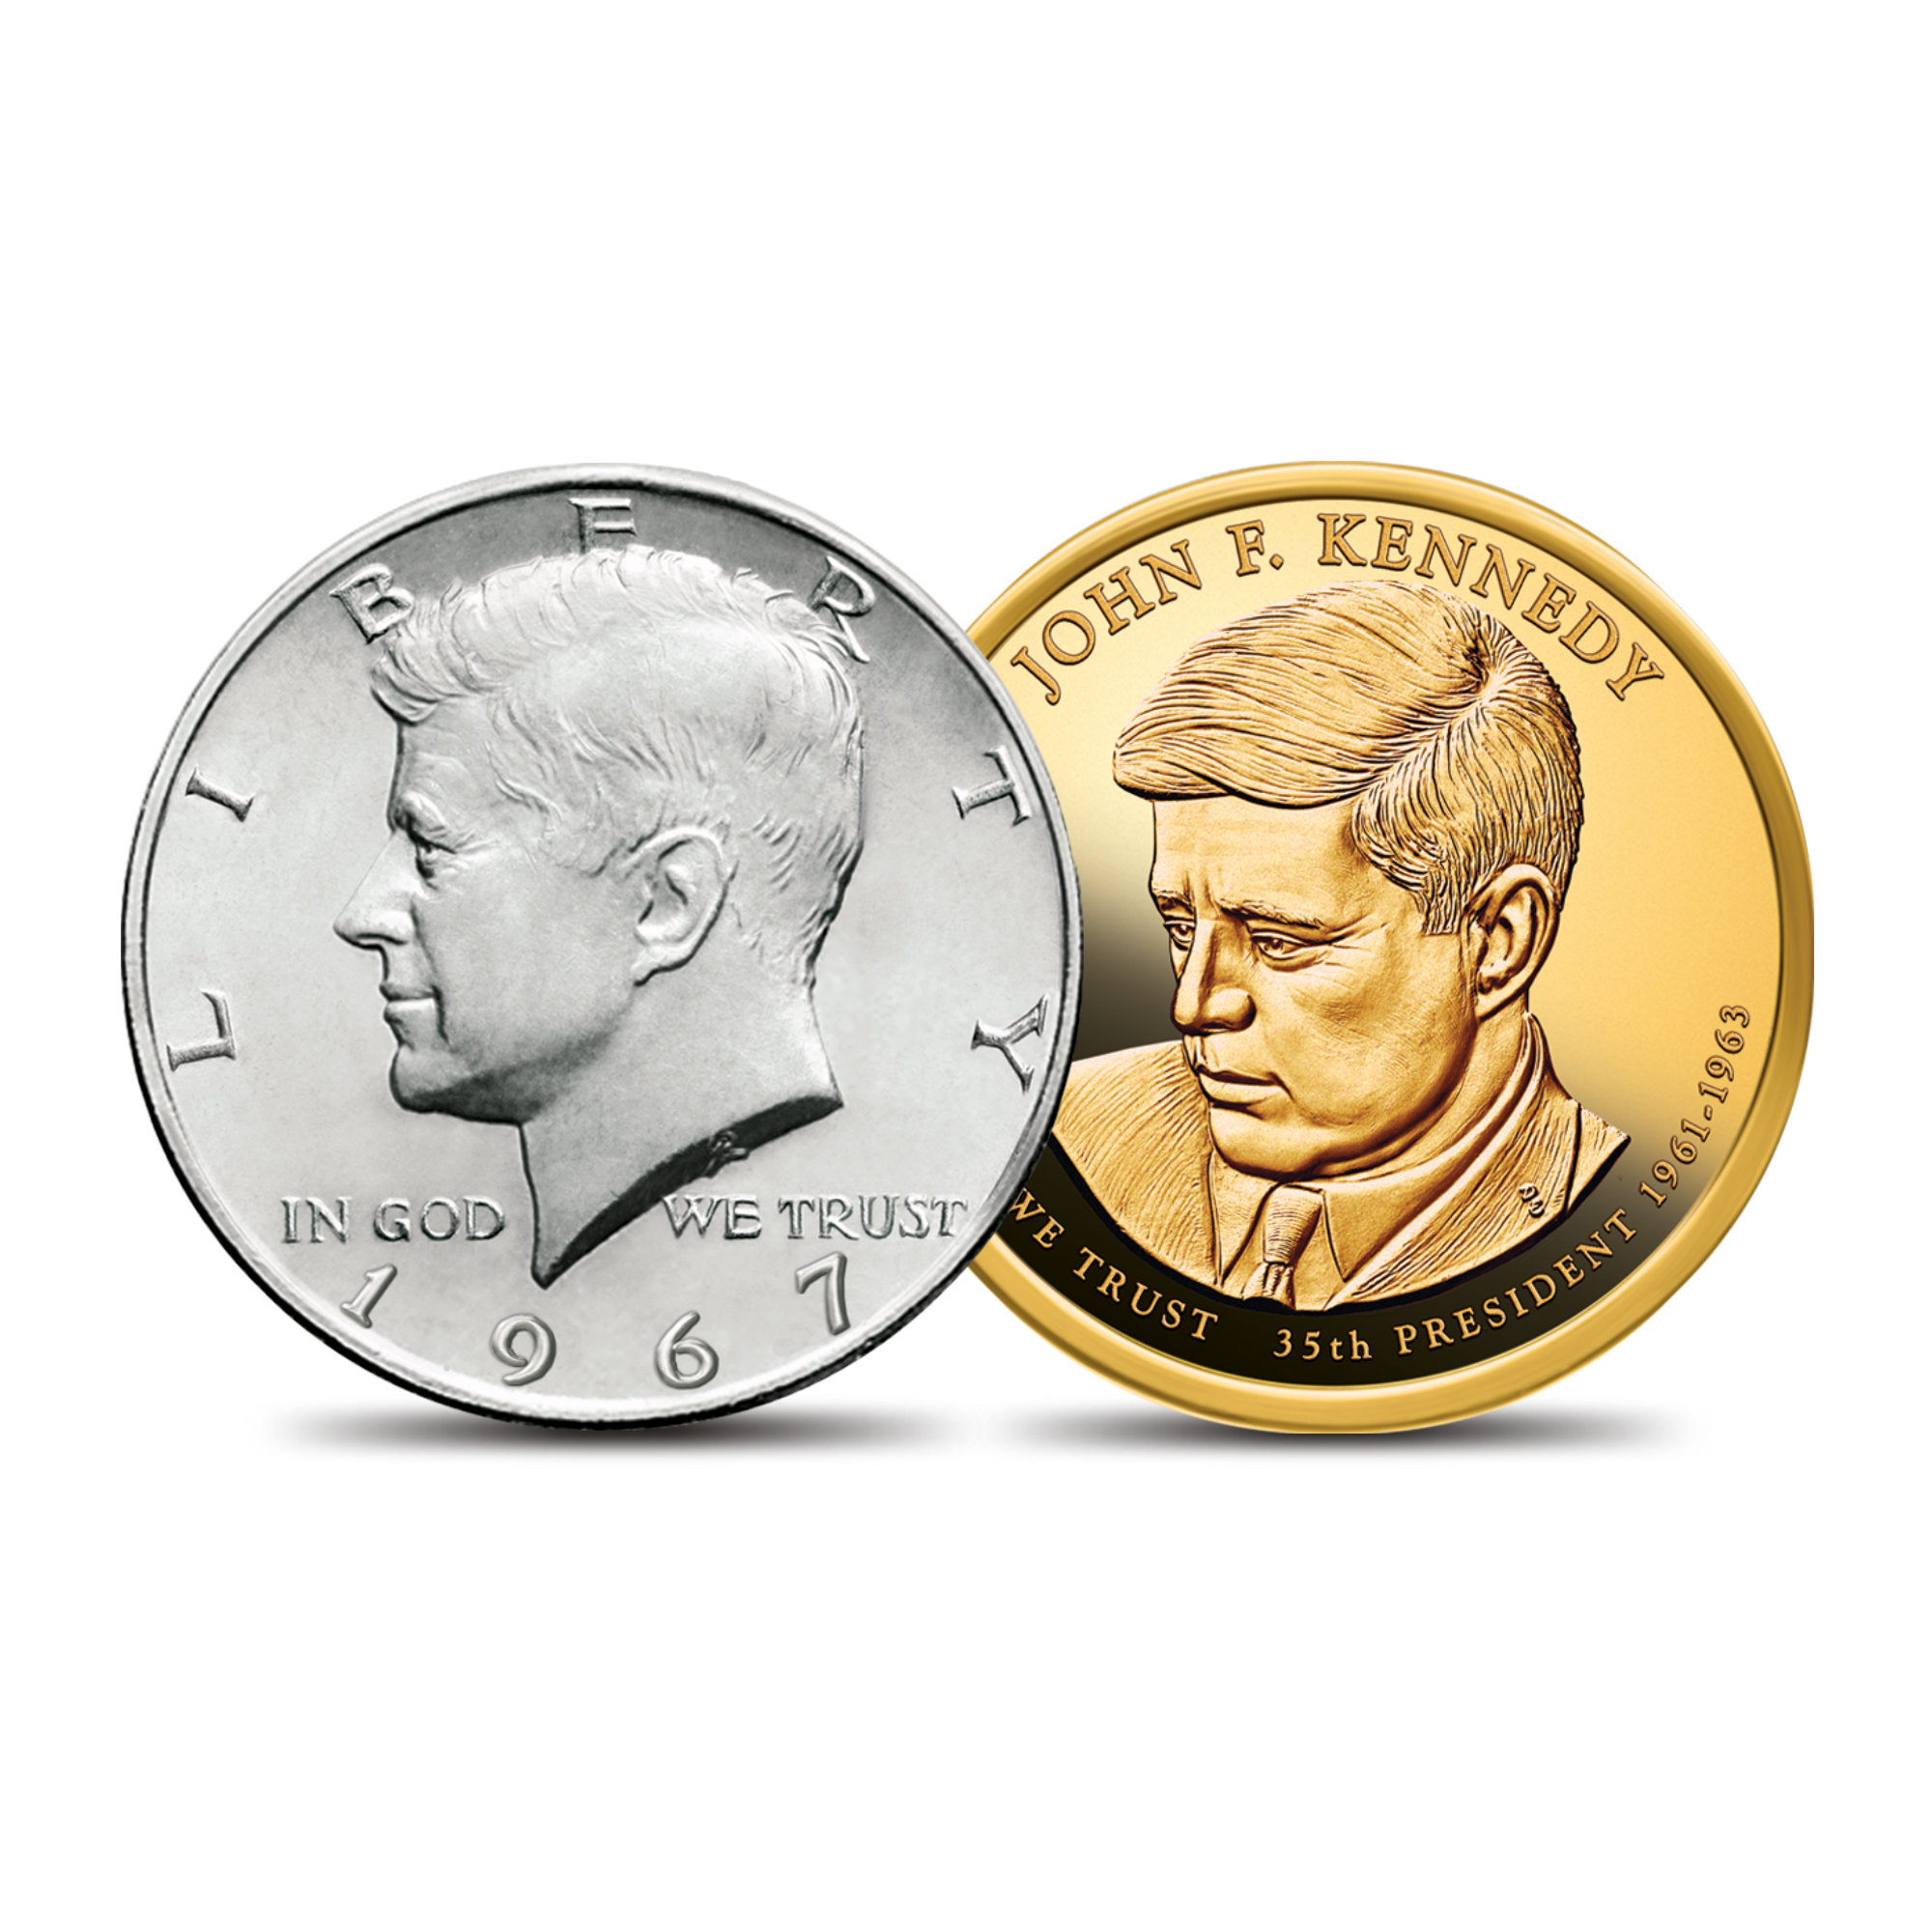 John F Kennedy Coin Currency Set 10704 0016 g display